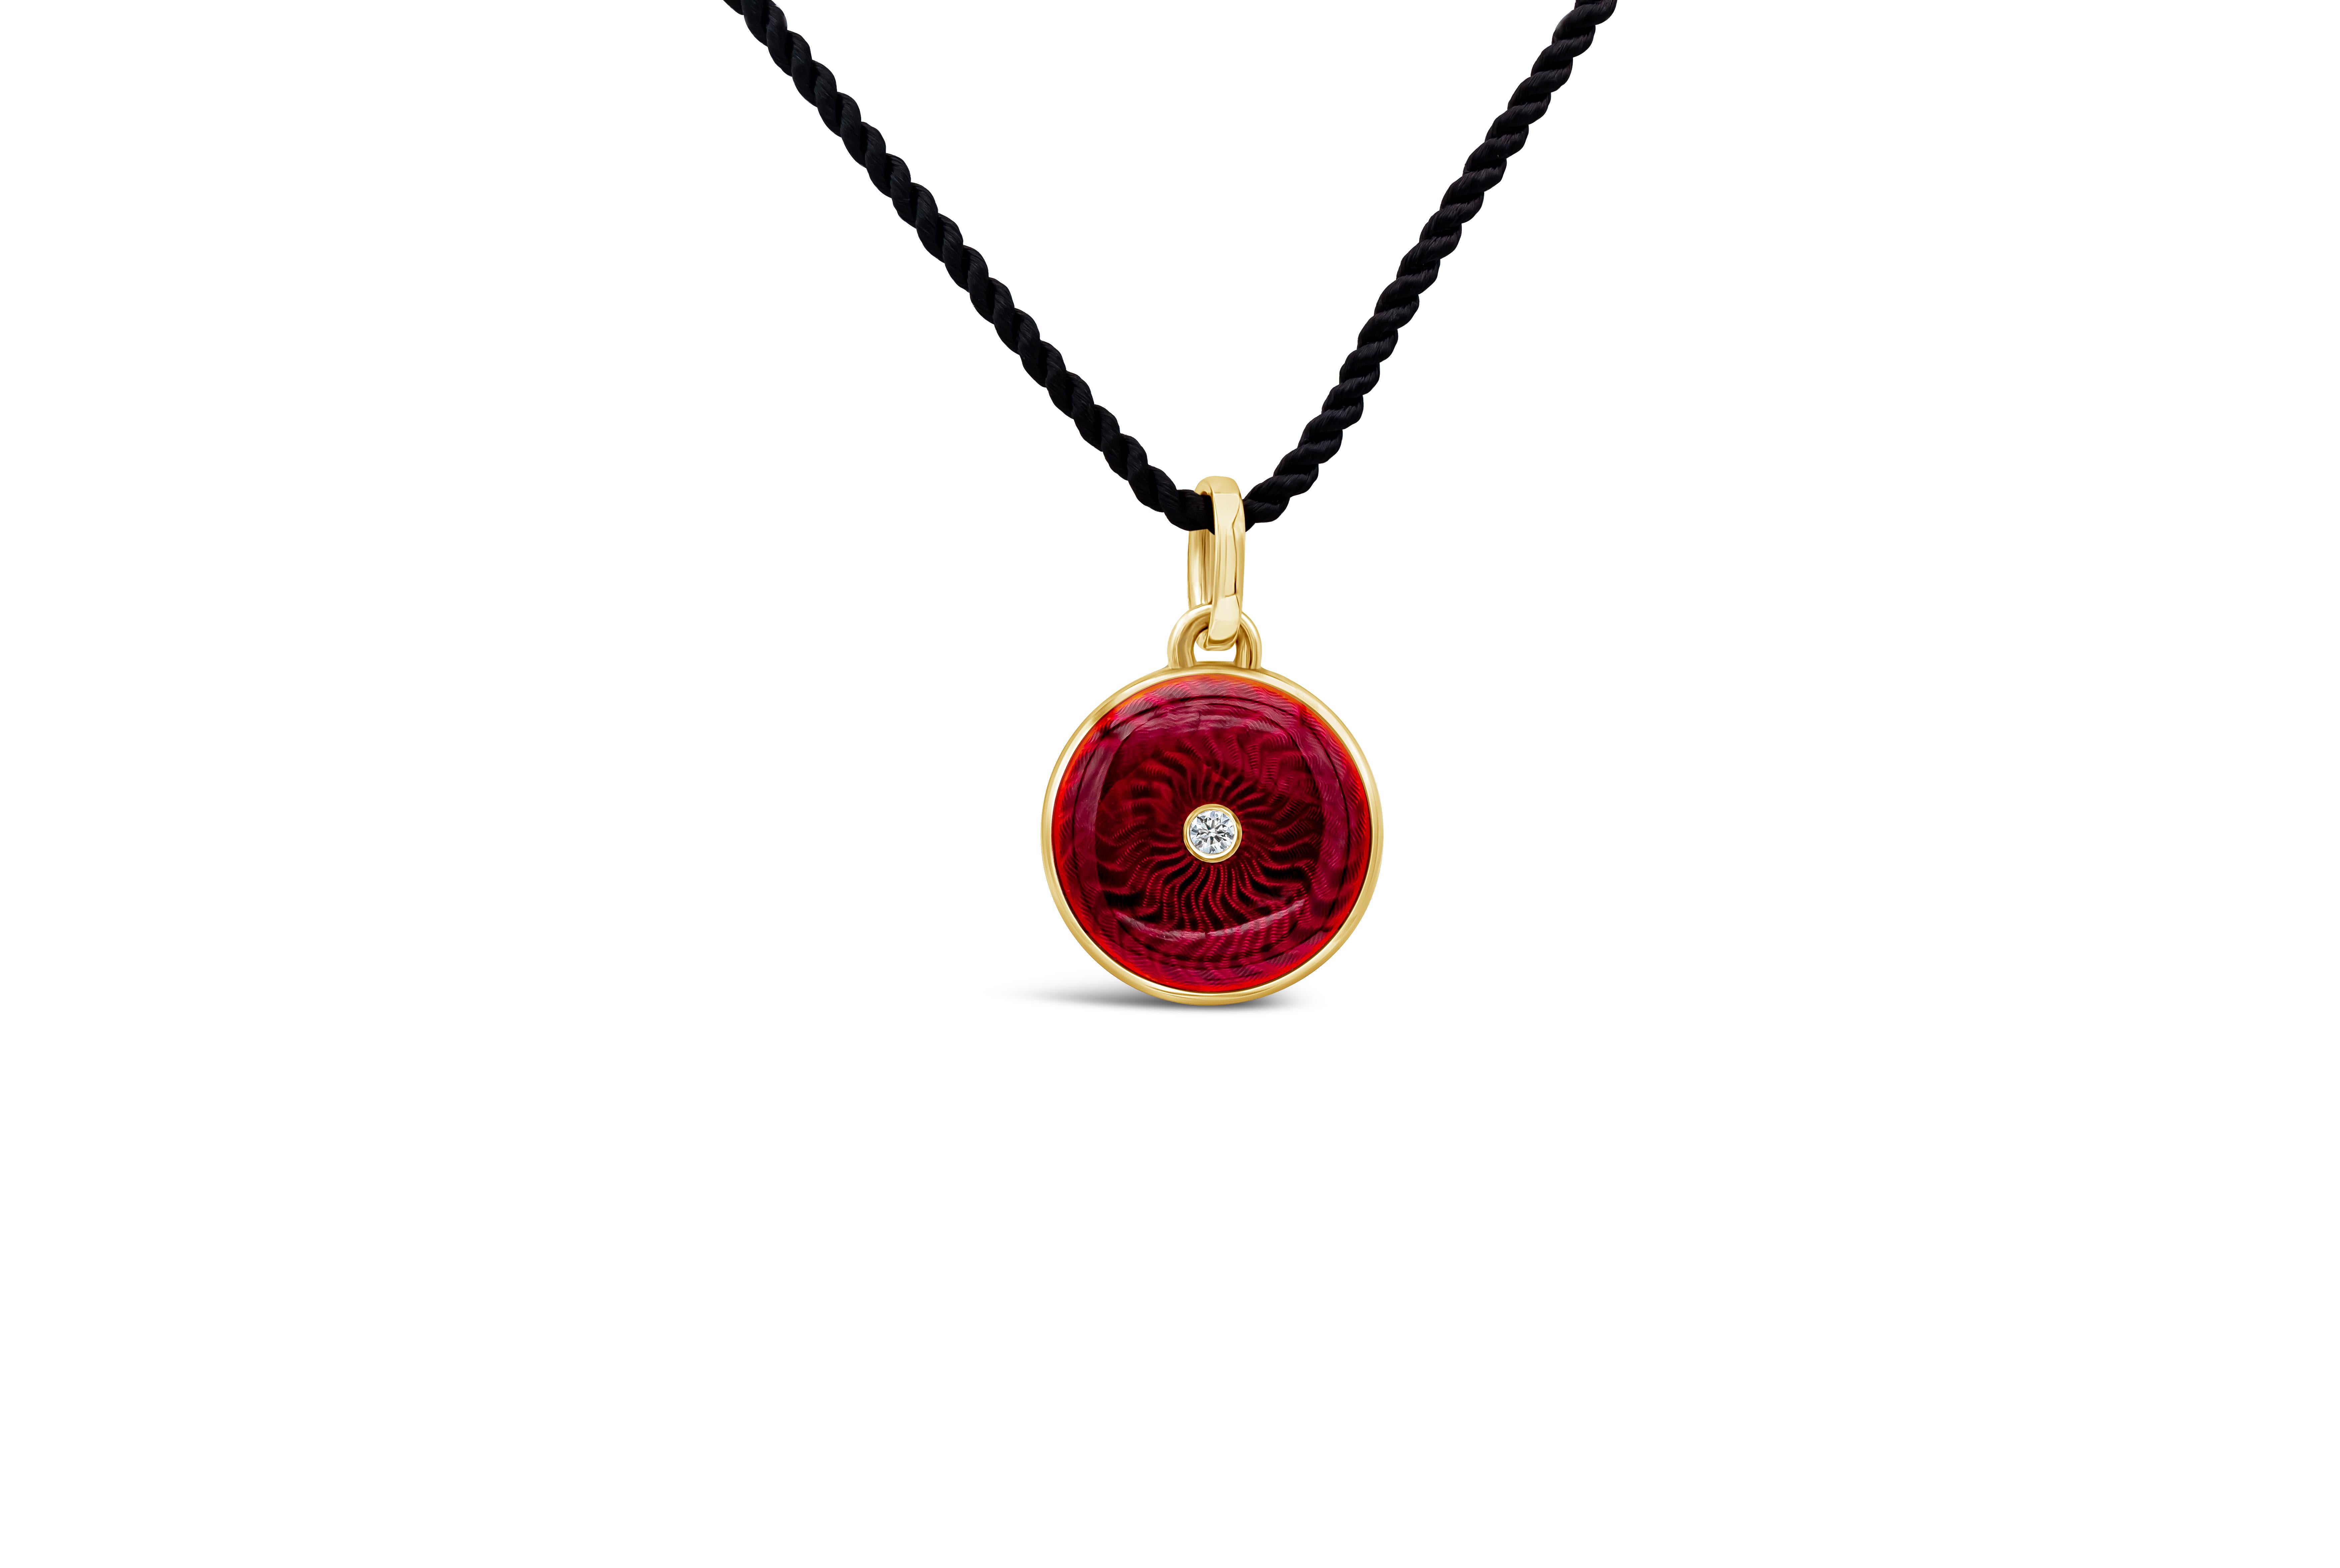 A fashionable circular pendant necklace showcasing a sunburst design red enamel, set with a round brilliant diamond in the middle. Stamped Victor Mayer at the back of the pendant. Made in 18 karat yellow gold. Suspended on a 16 inch yellow gold